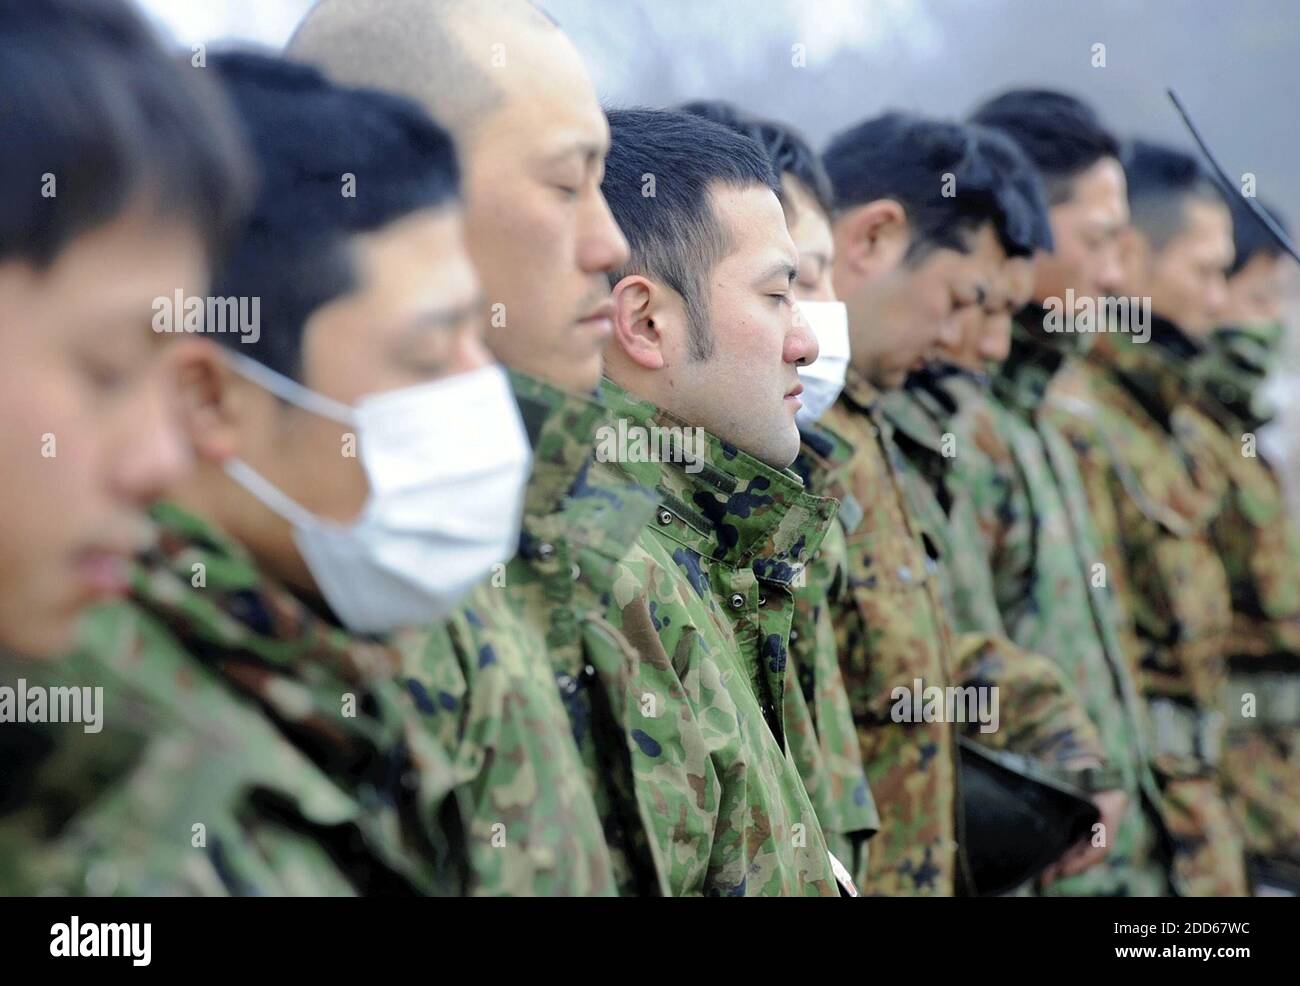 NO FILM, NO VIDEO, NO TV, NO DOCUMENTARY - GSDF members observe a moment of silence for disaster victims Saturday morning before starting the day's search-and-rescue operations, March 26, 2011. Photo by Yomiuri Shumbun/MCT/ABACAPRESS.COM Stock Photo